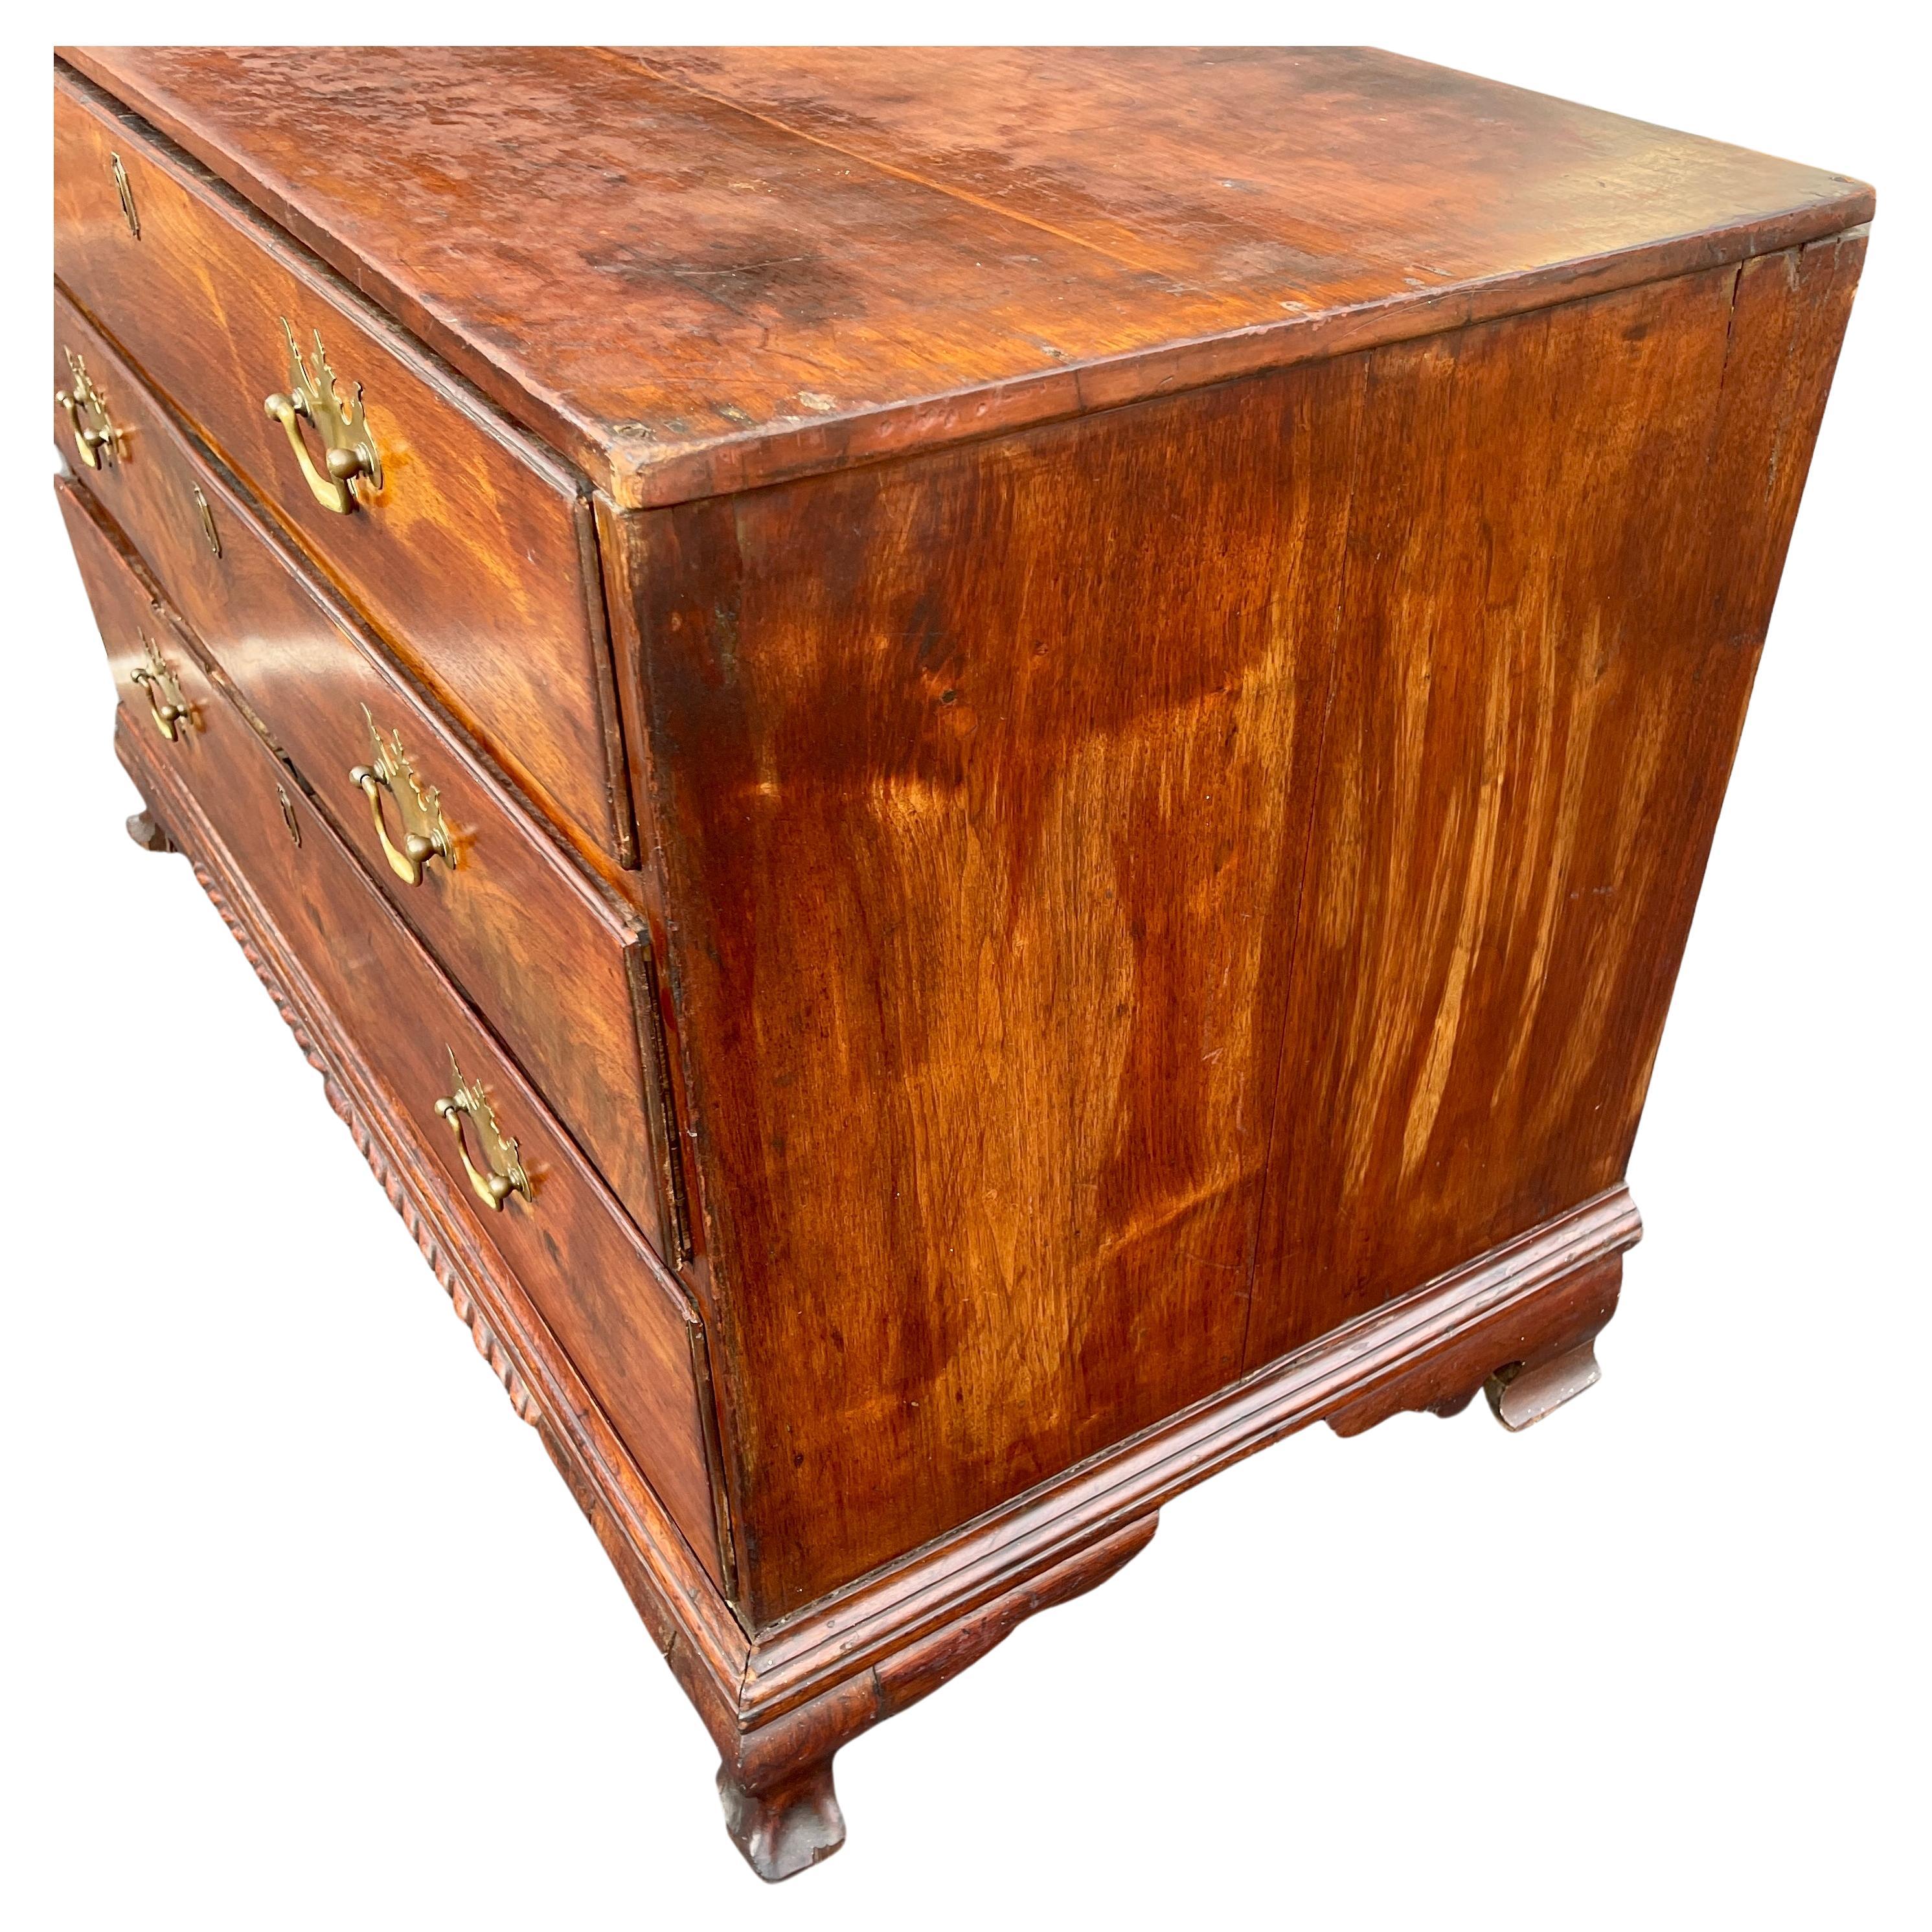 Early American Federal Chest of Drawers 1